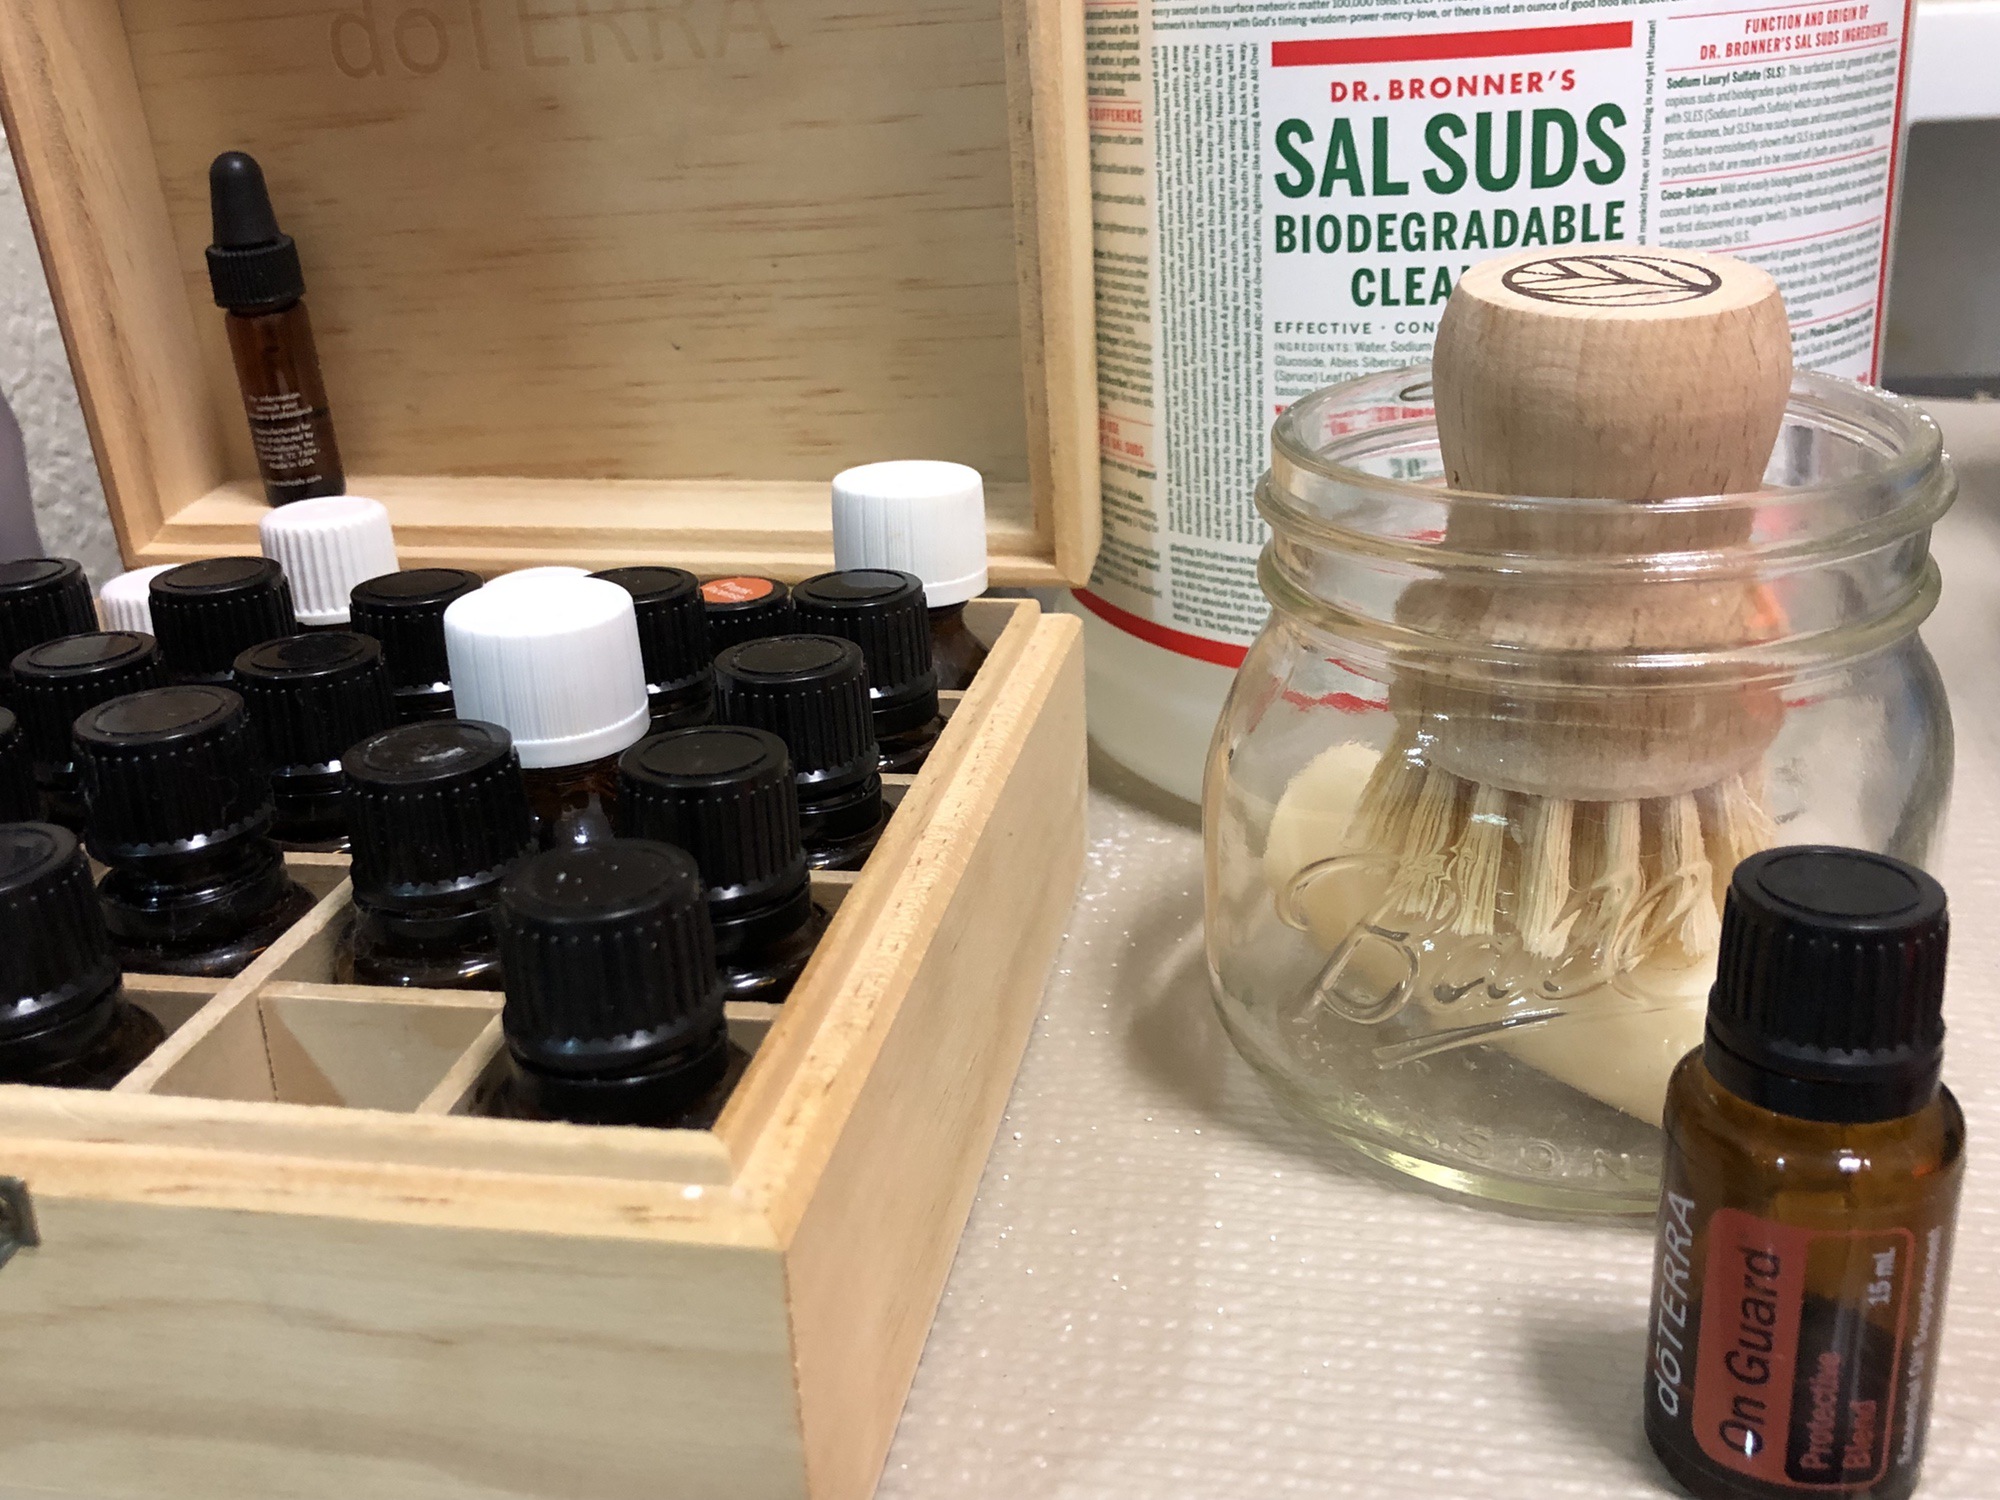 Top 10 Ways I've Found to Incorporate Essential Oils for Daily Use 1